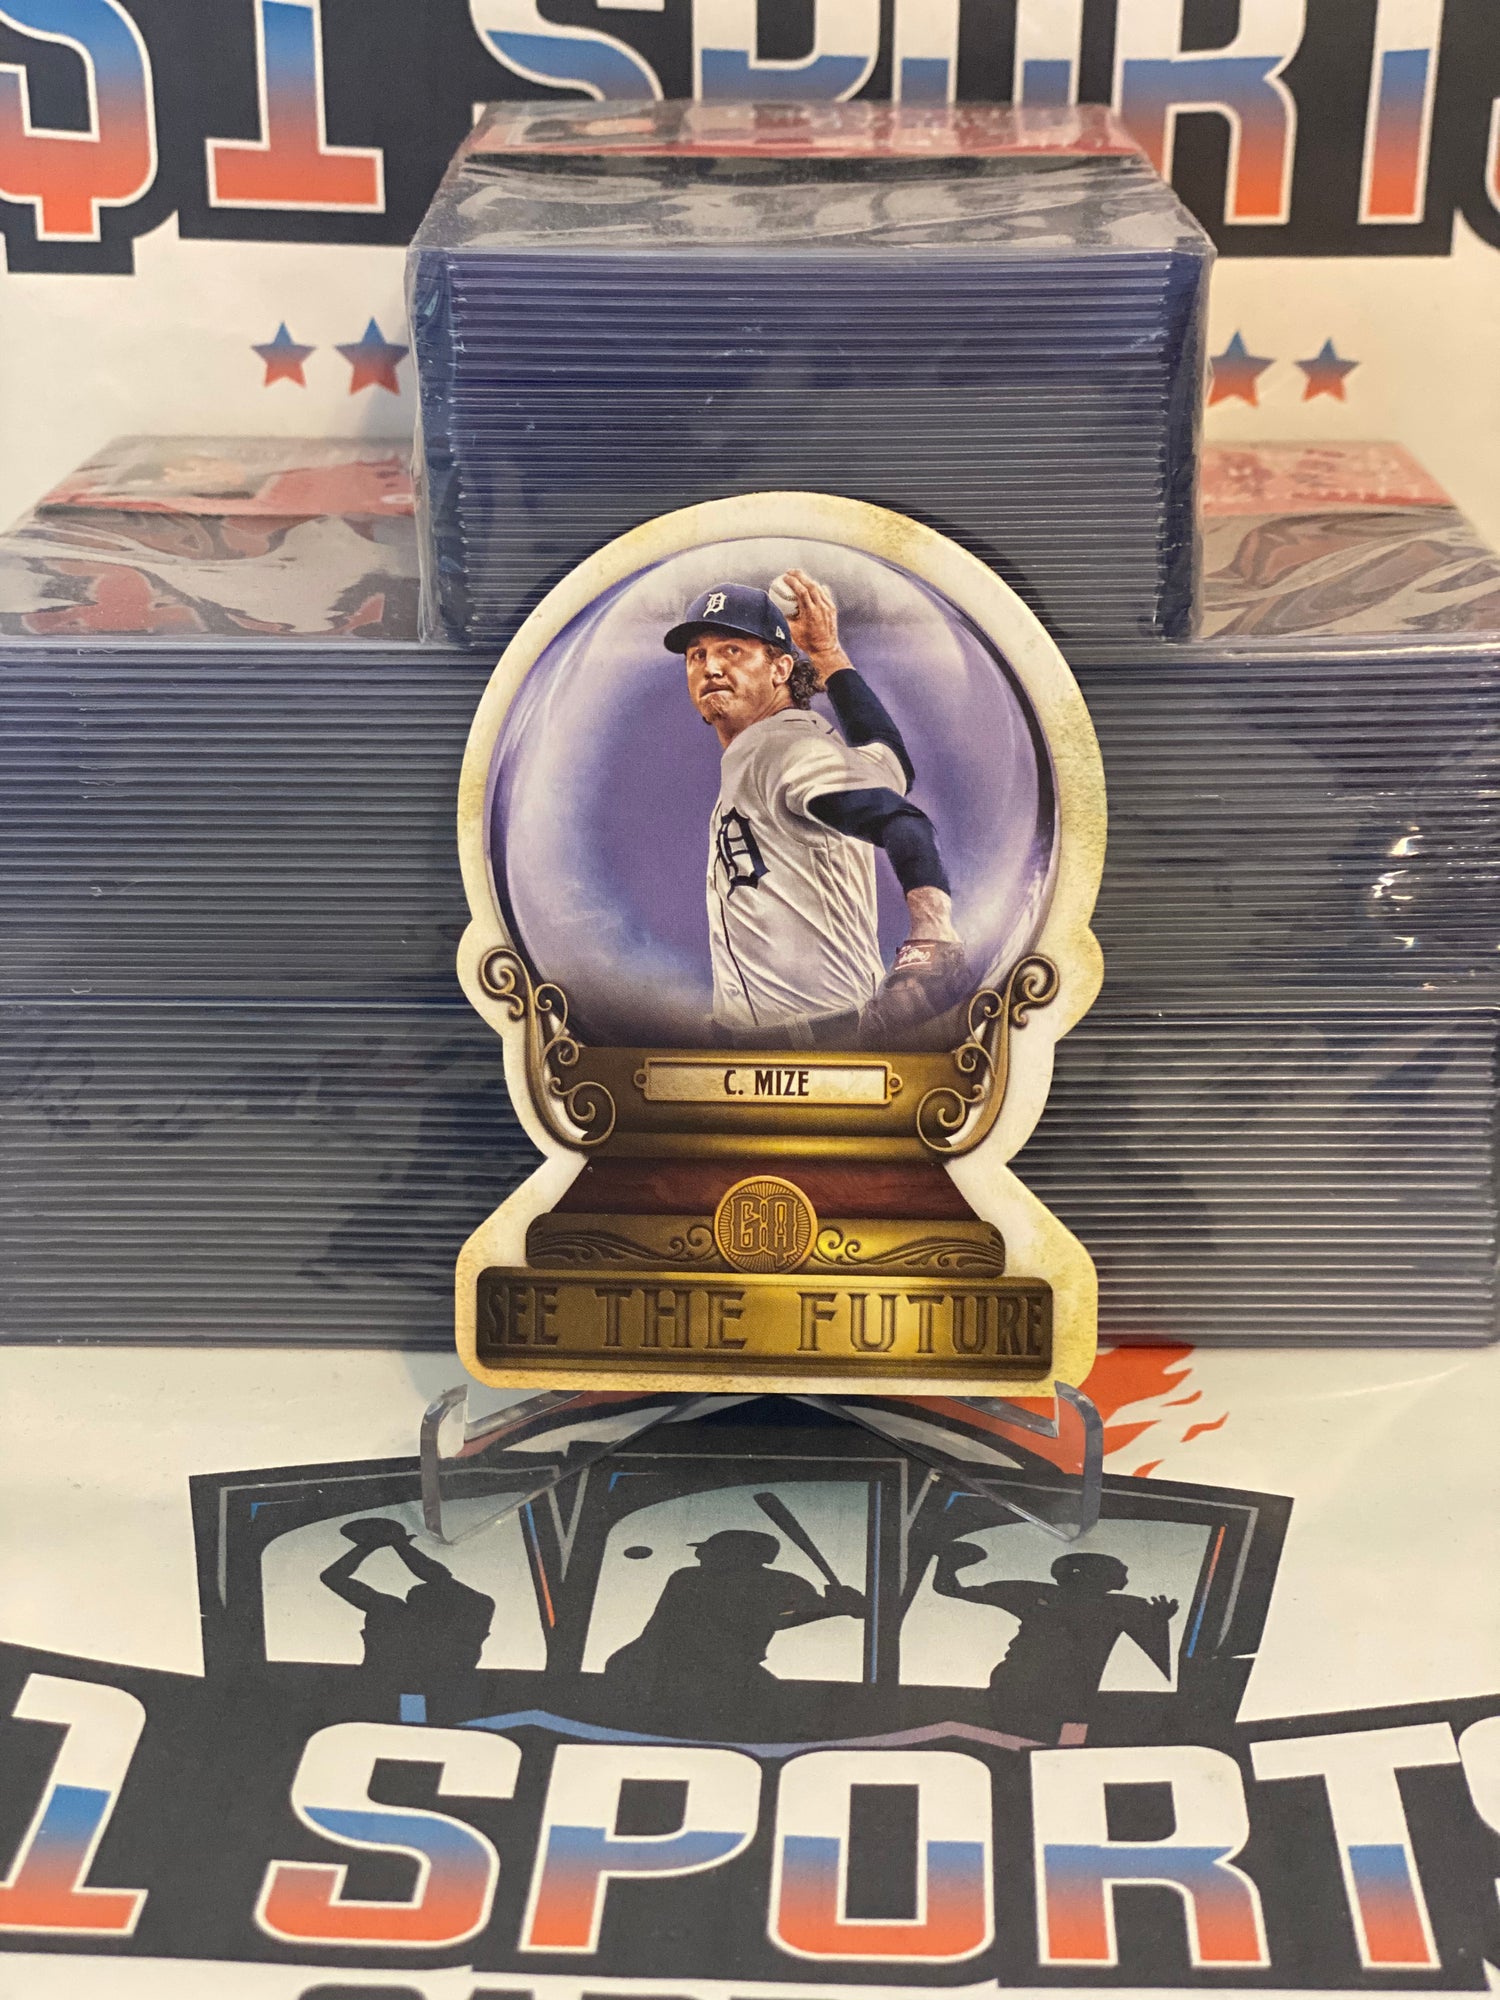 2021 Topps Gypsy Queen (See the Future) Casey Mize Rookie #GG-17